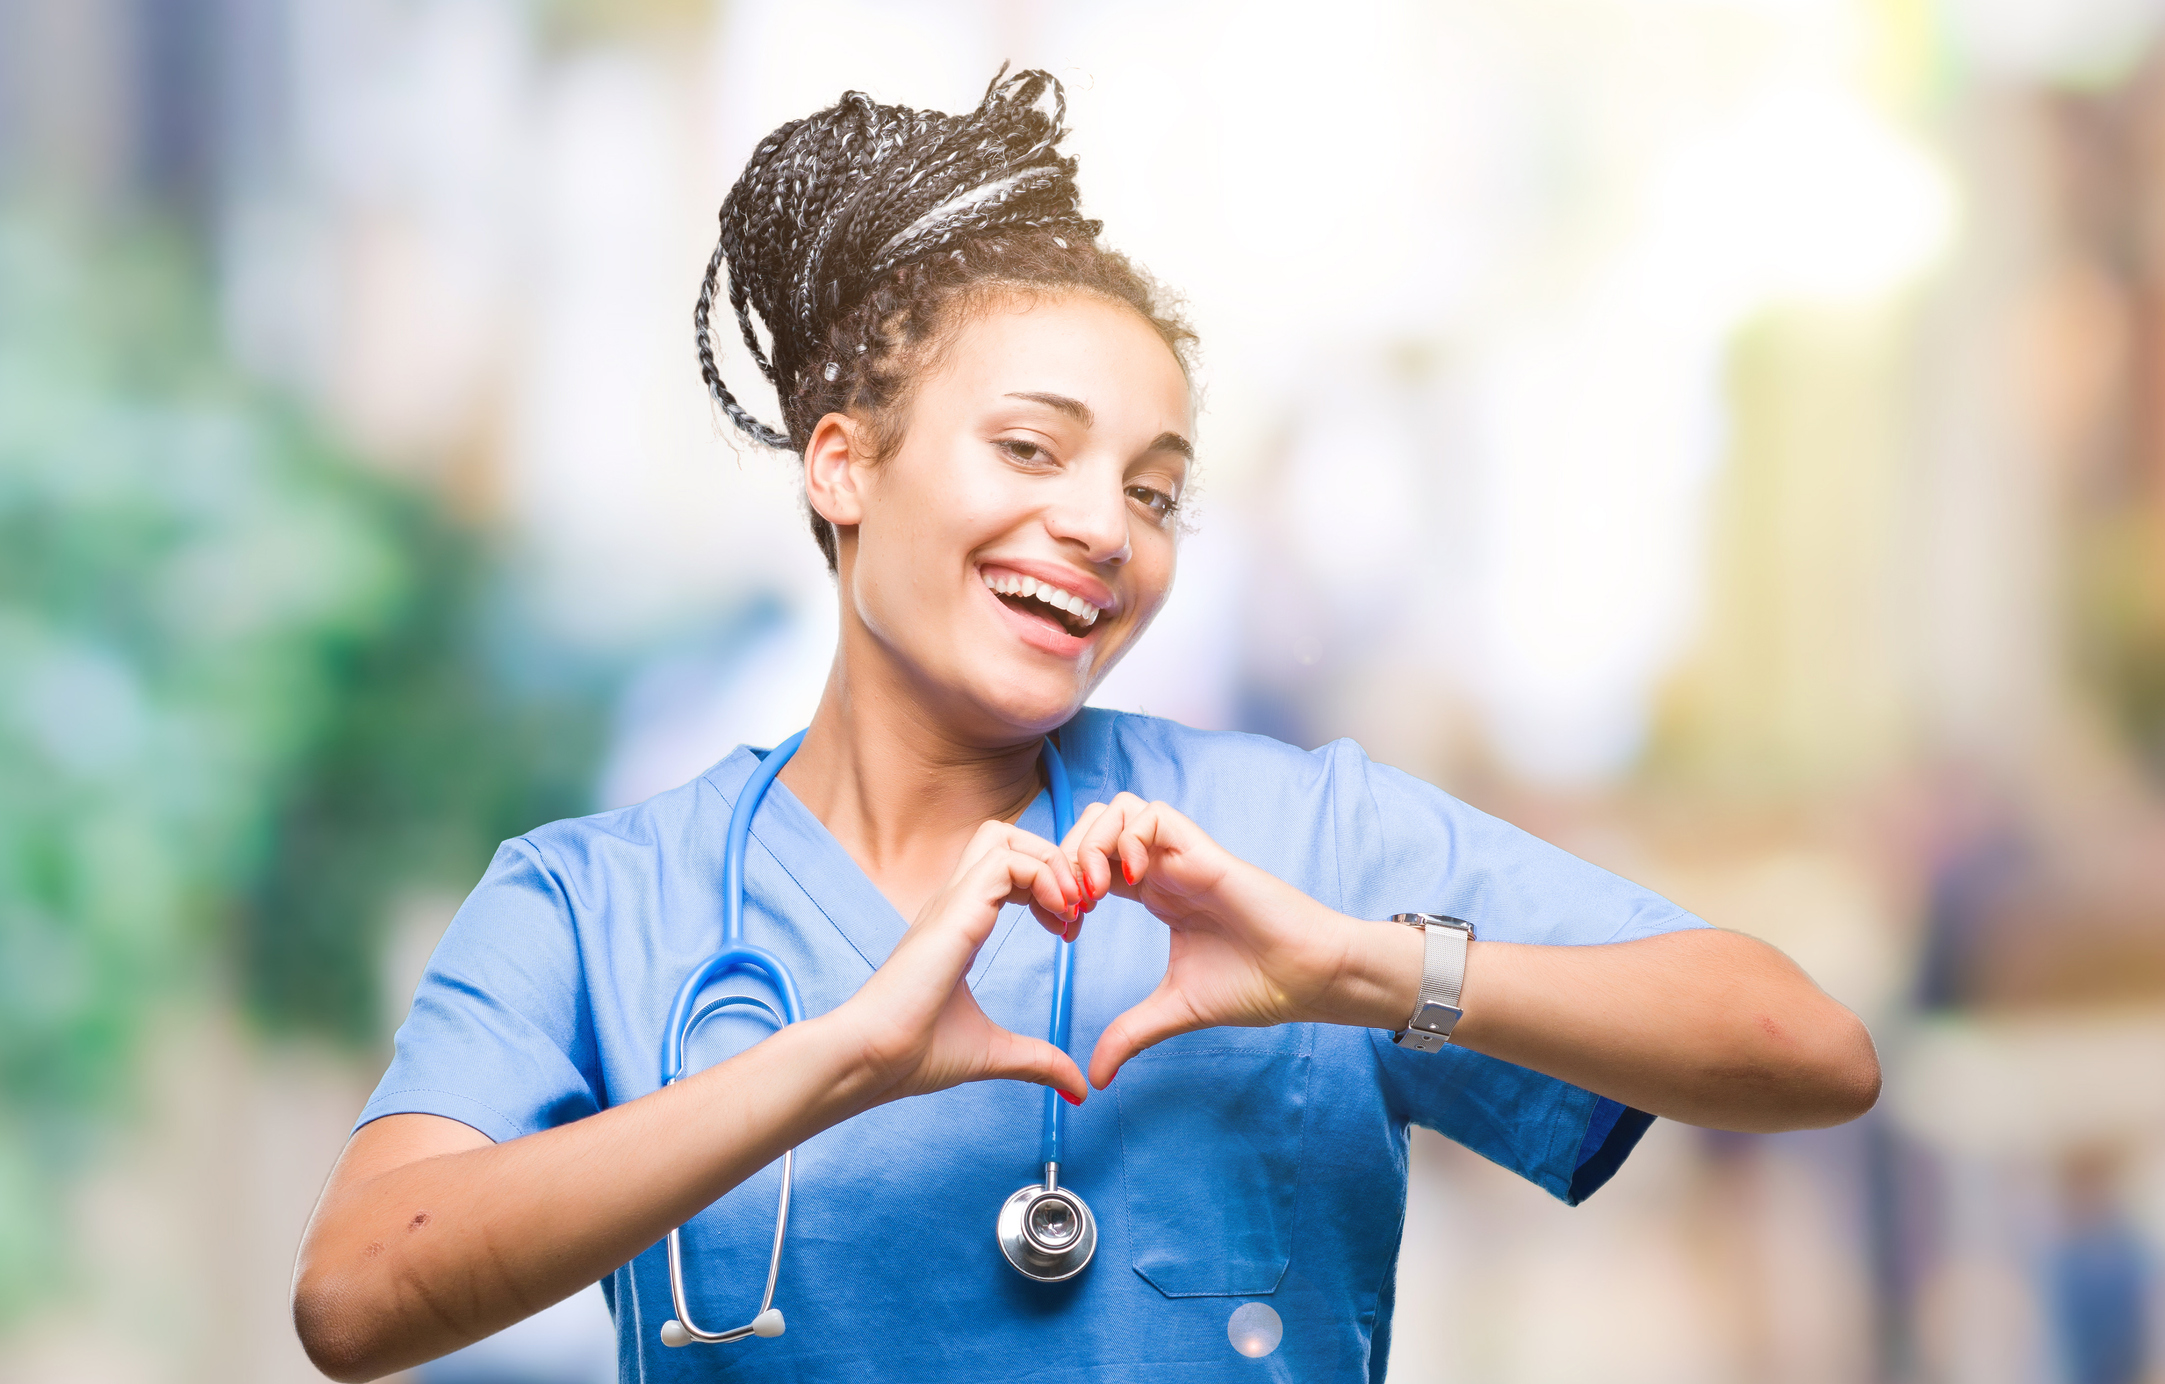 7 Reasons to Love Being a Nurse